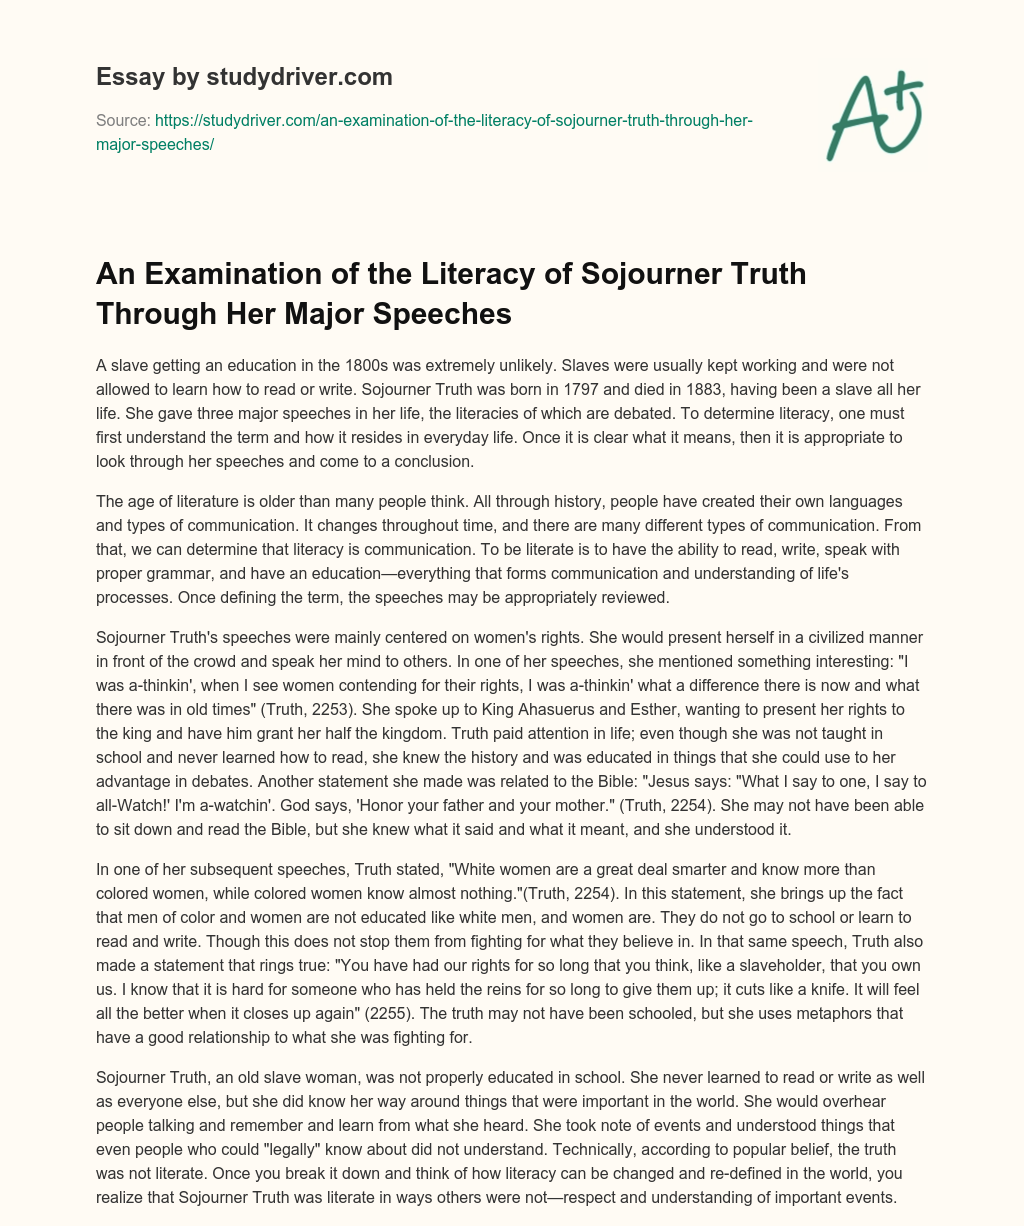 An Examination of the Literacy of Sojourner Truth through her Major Speeches essay